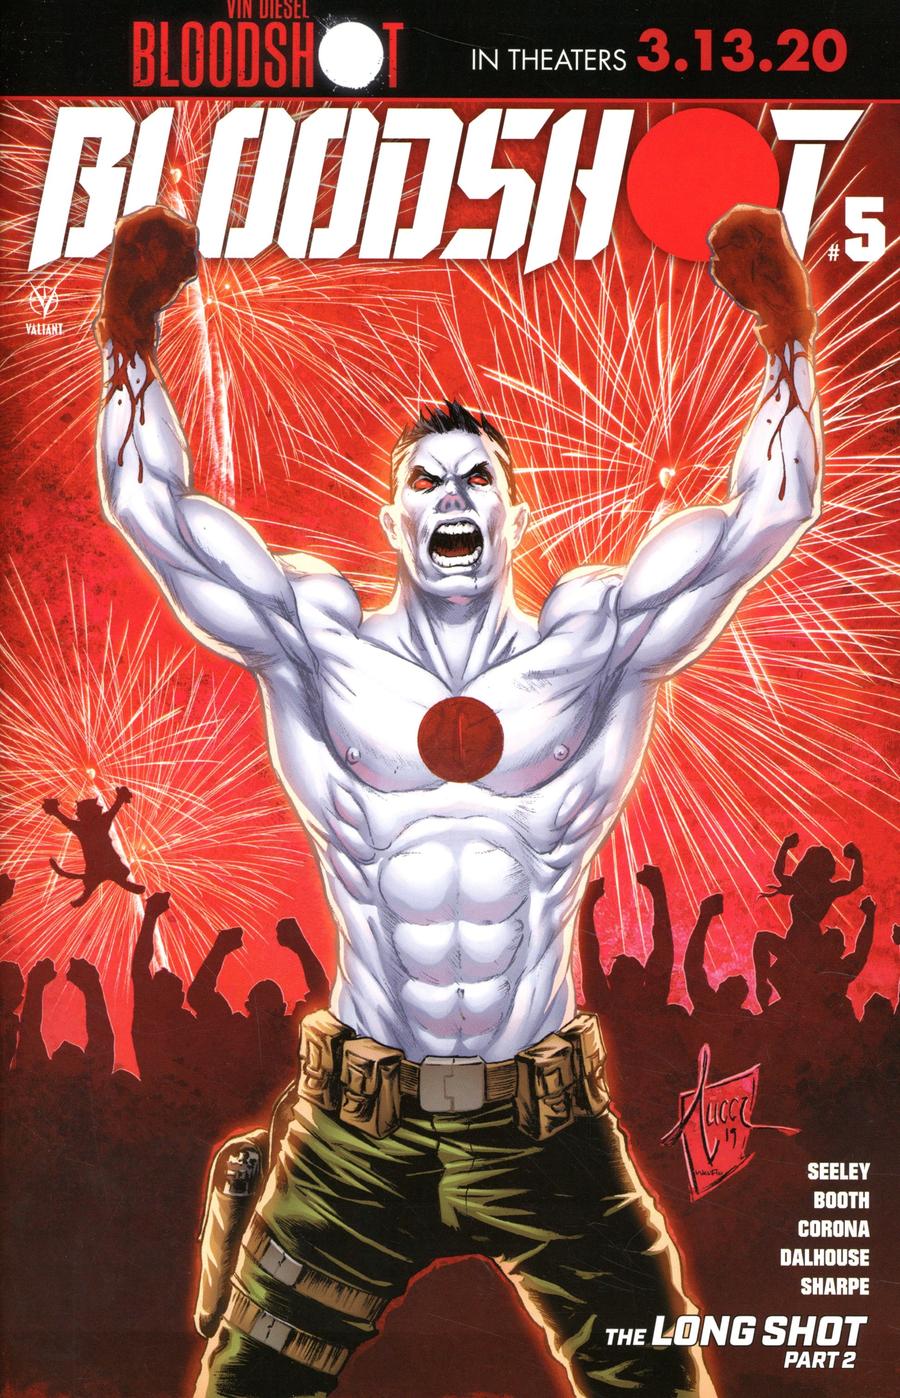 Bloodshot Vol 4 #5 Cover B Variant Billy Tucci Cover